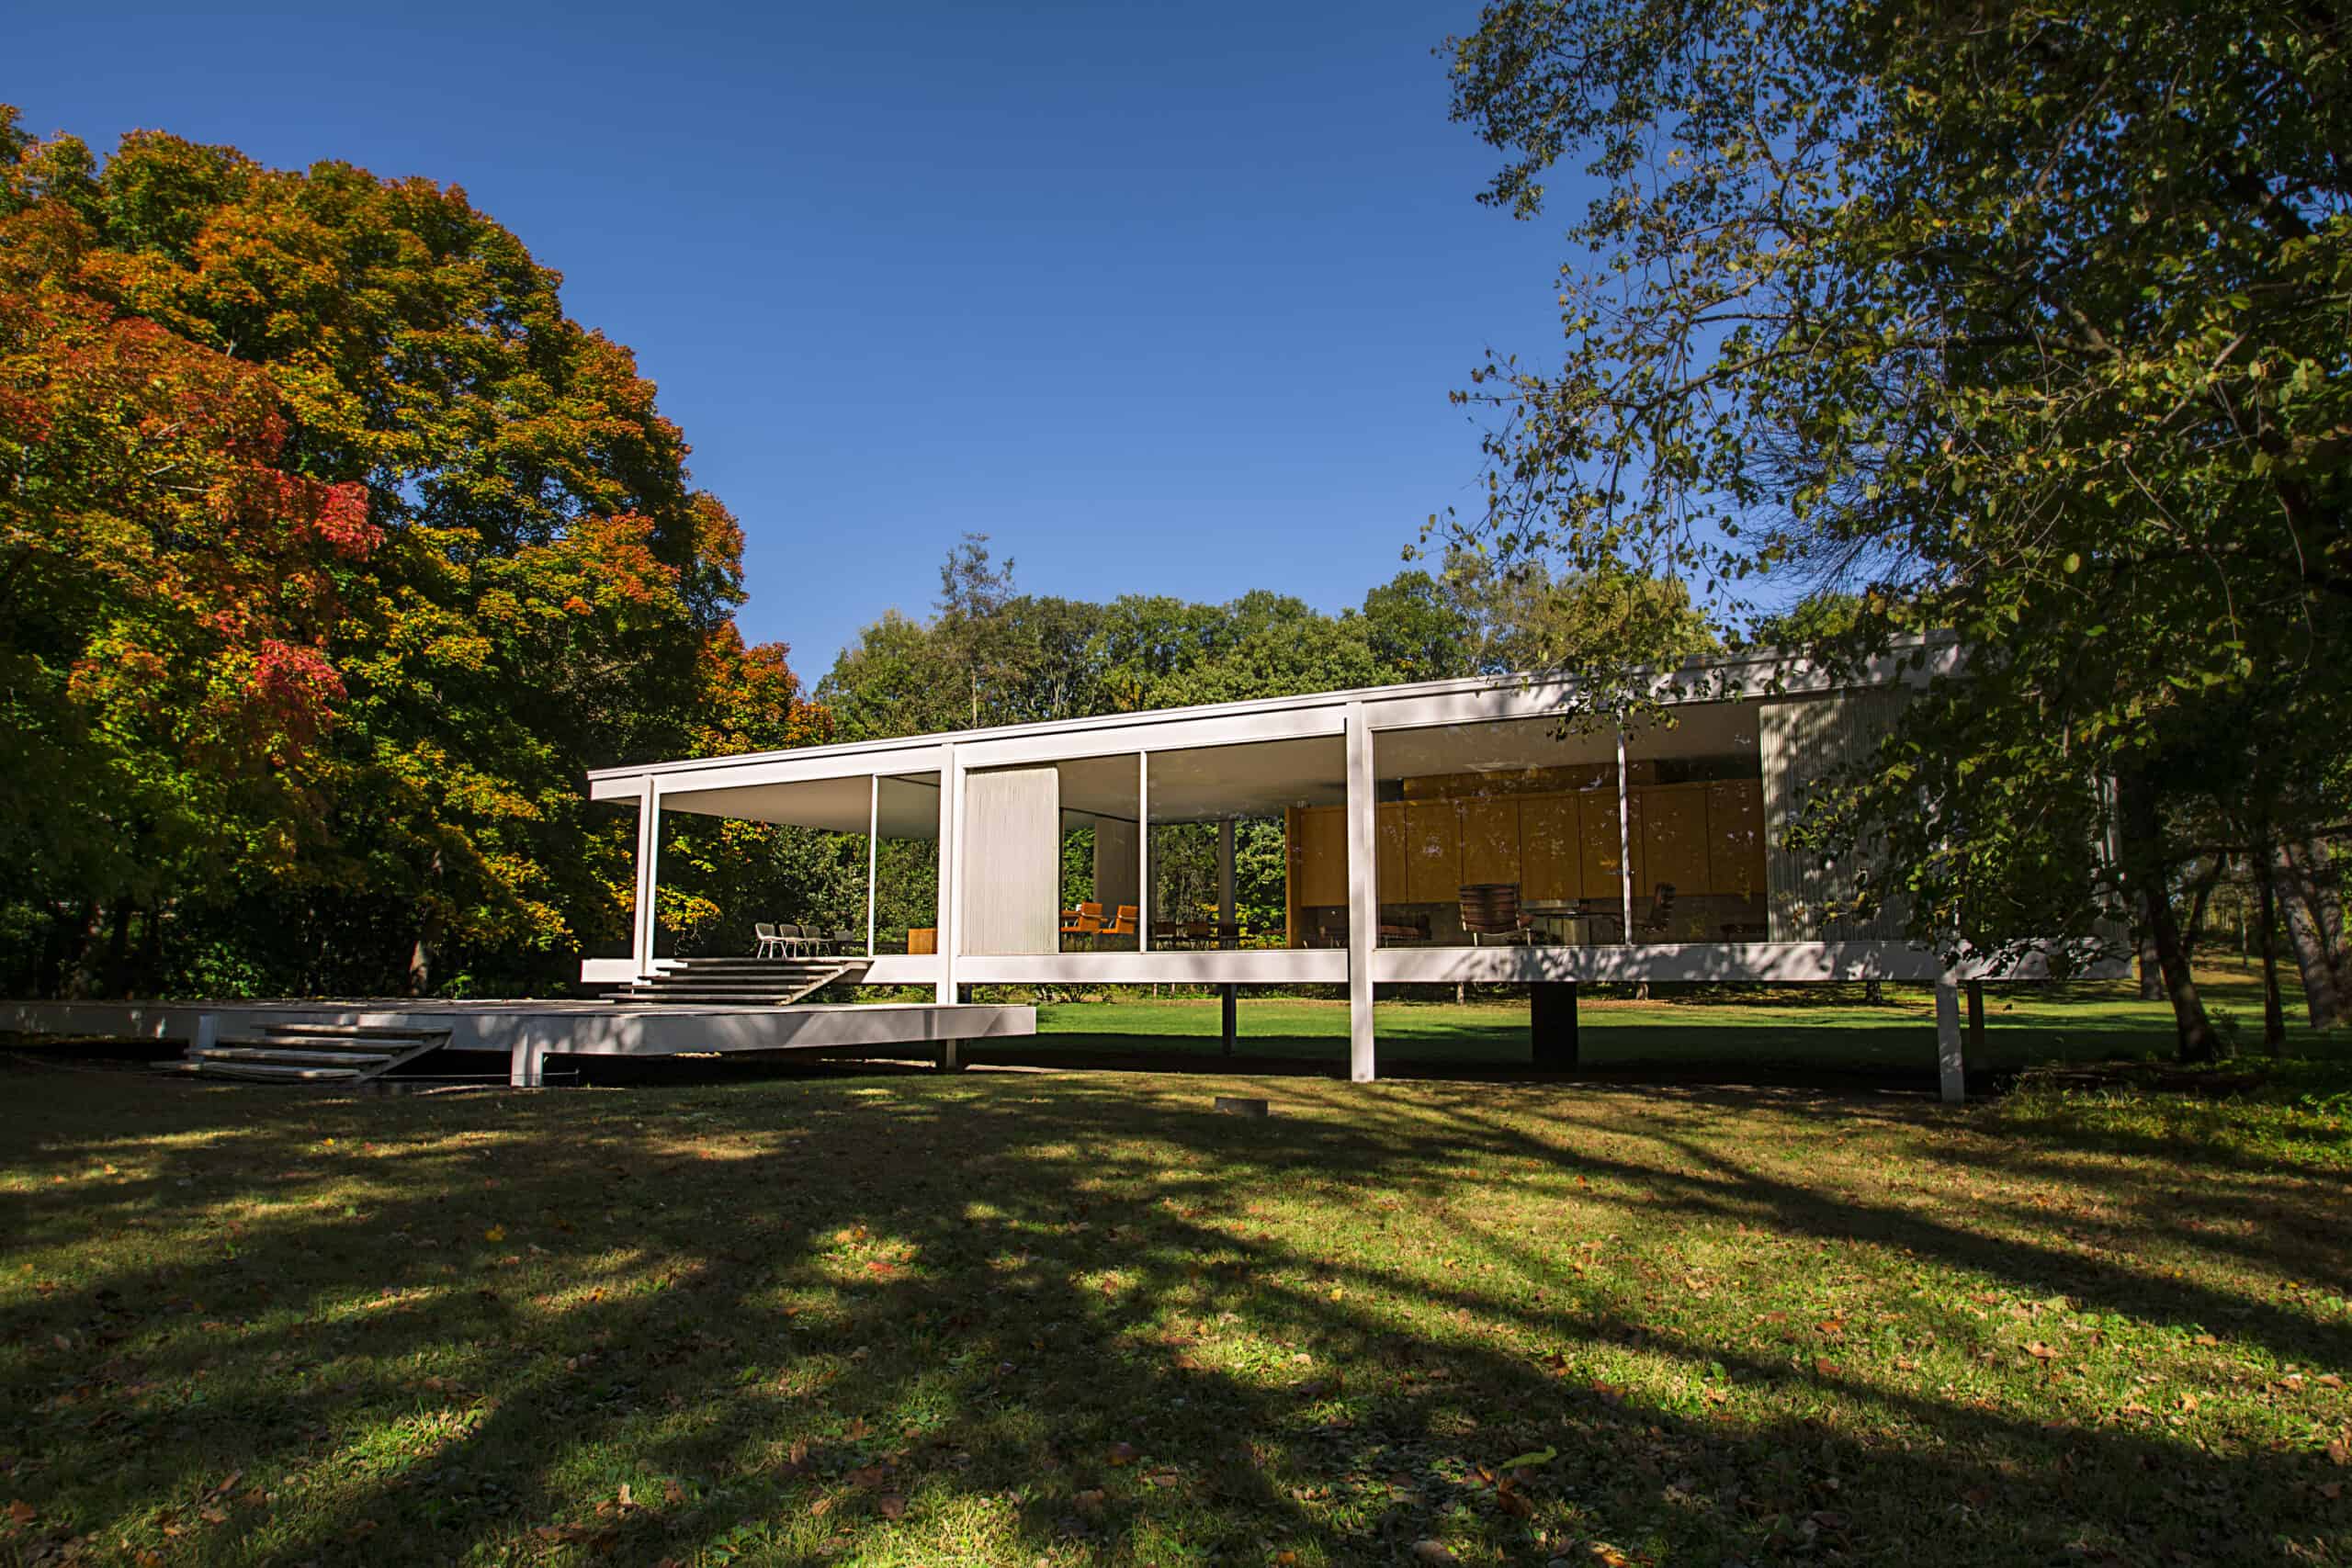 Mies van der Rohe: The Architect Who Thought Less Was More